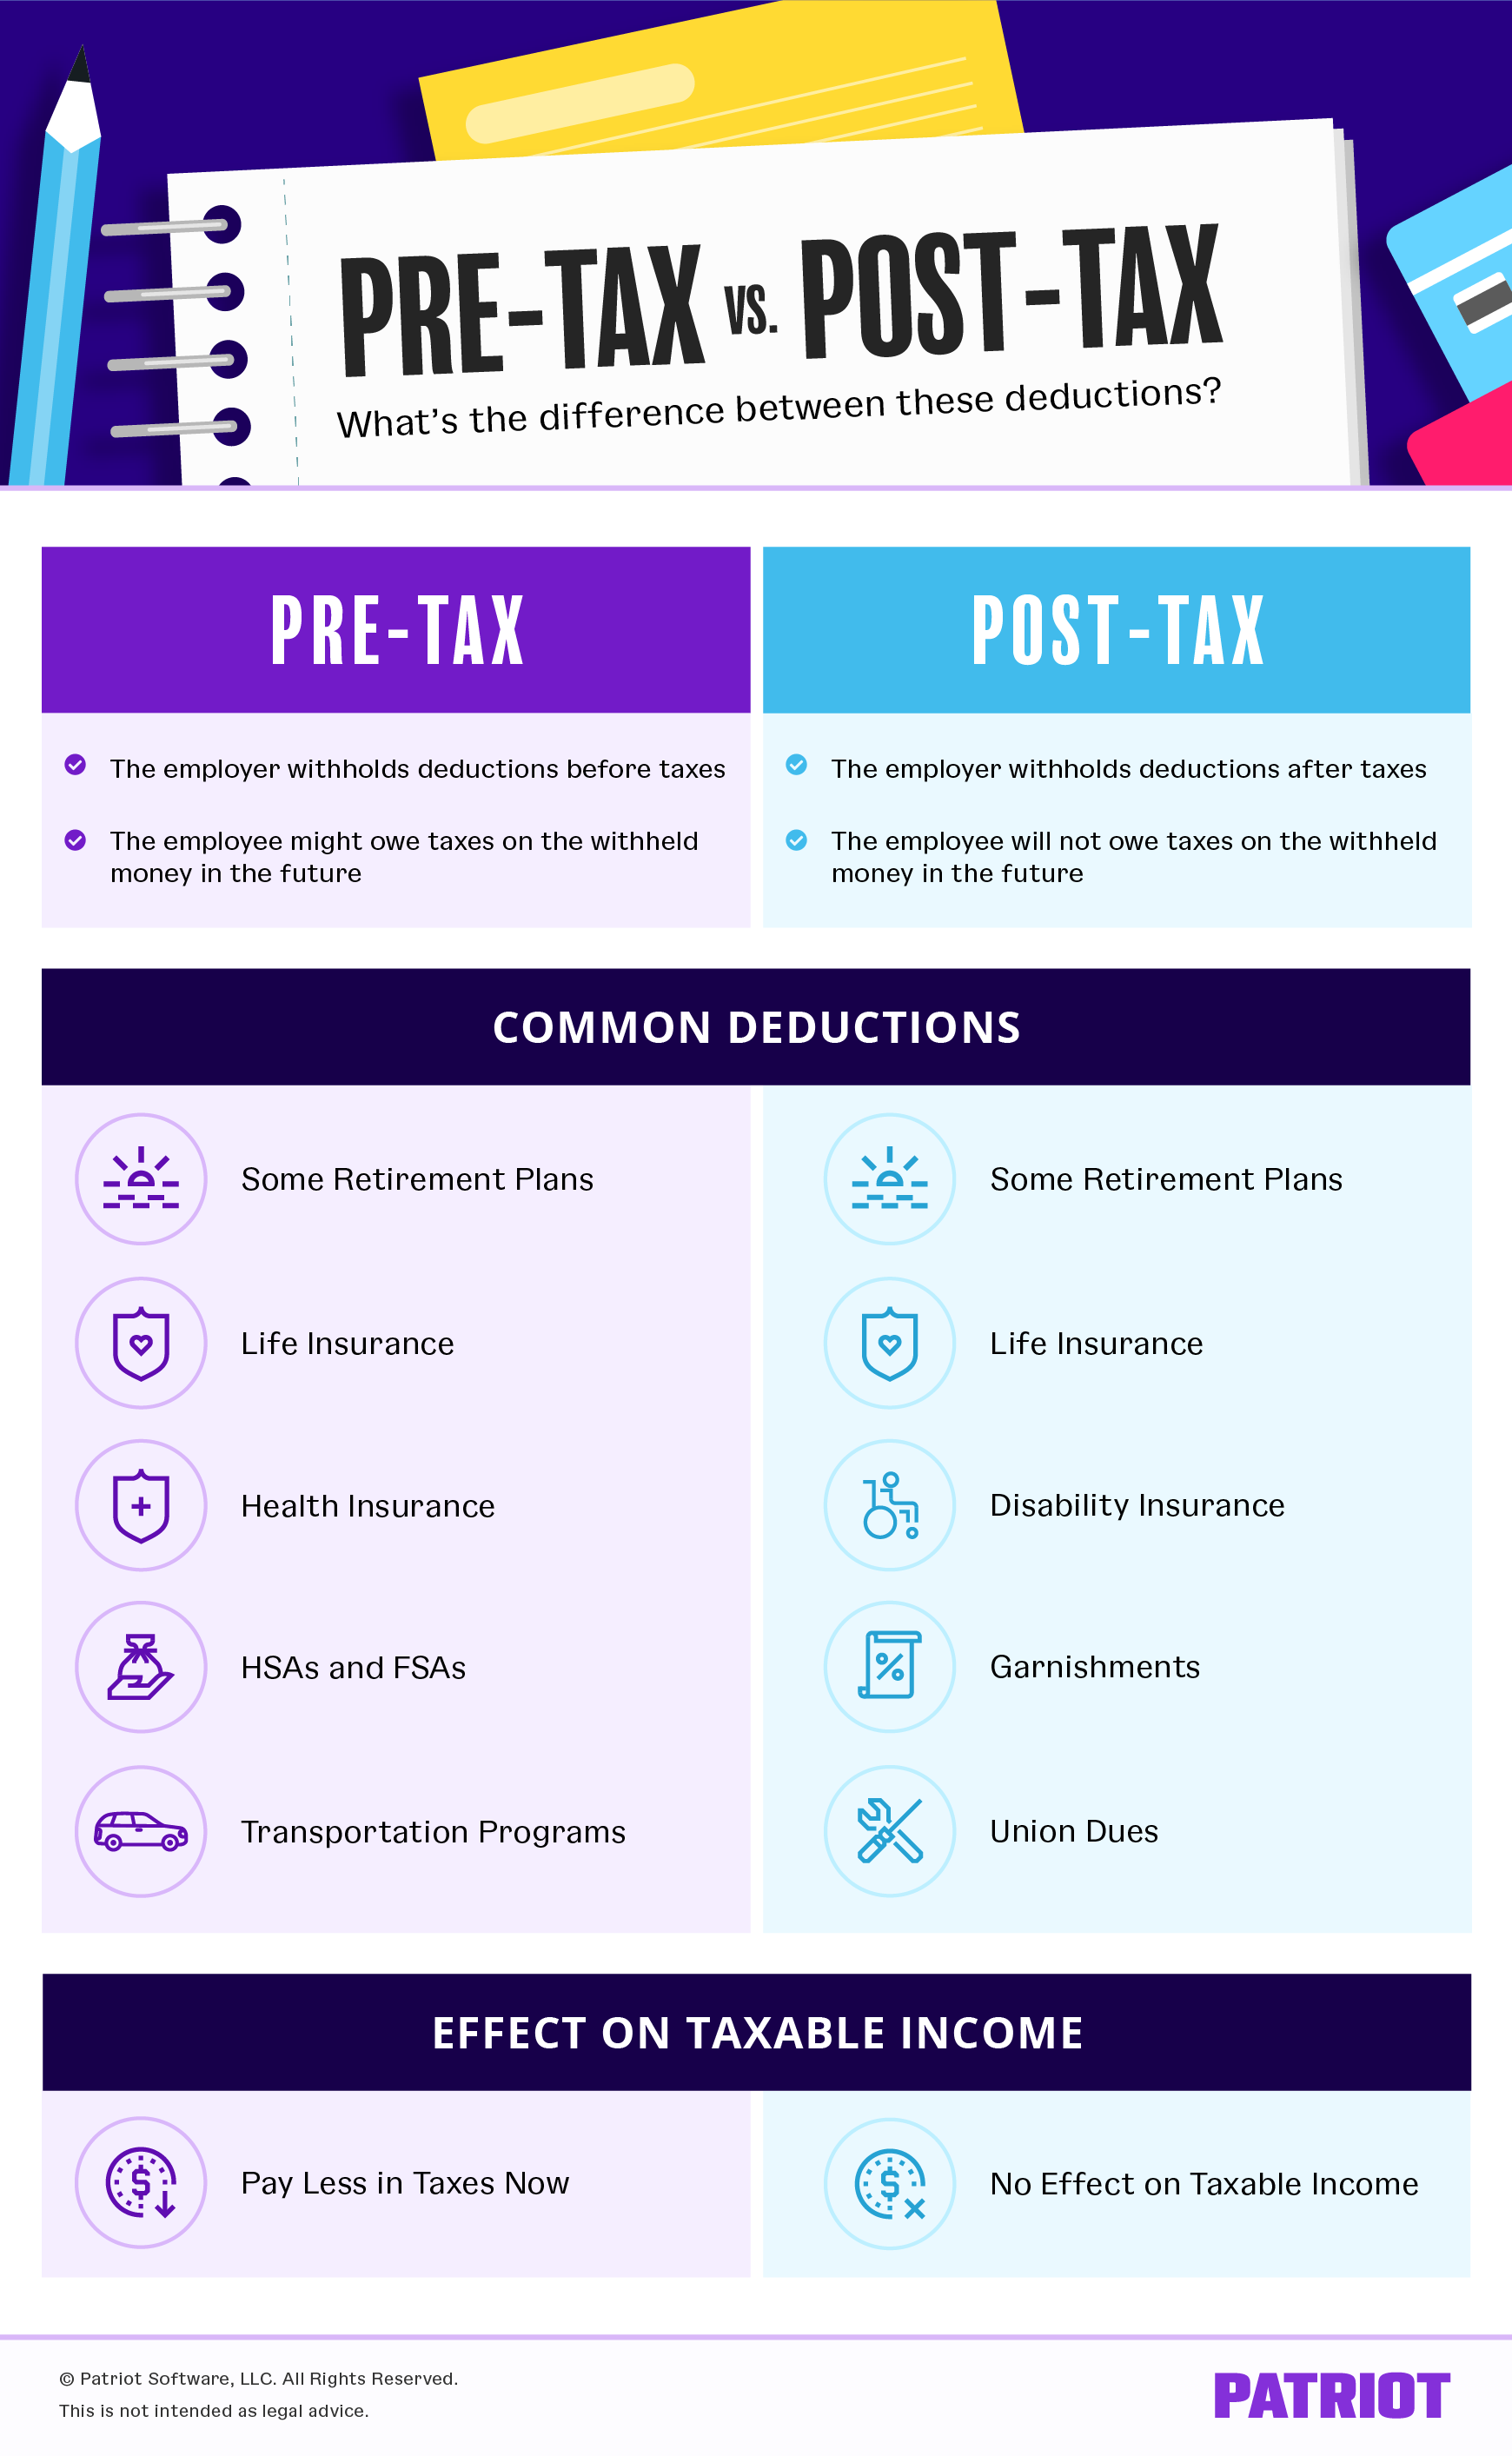 Pretax vs. Posttax Deductions What's the Difference?